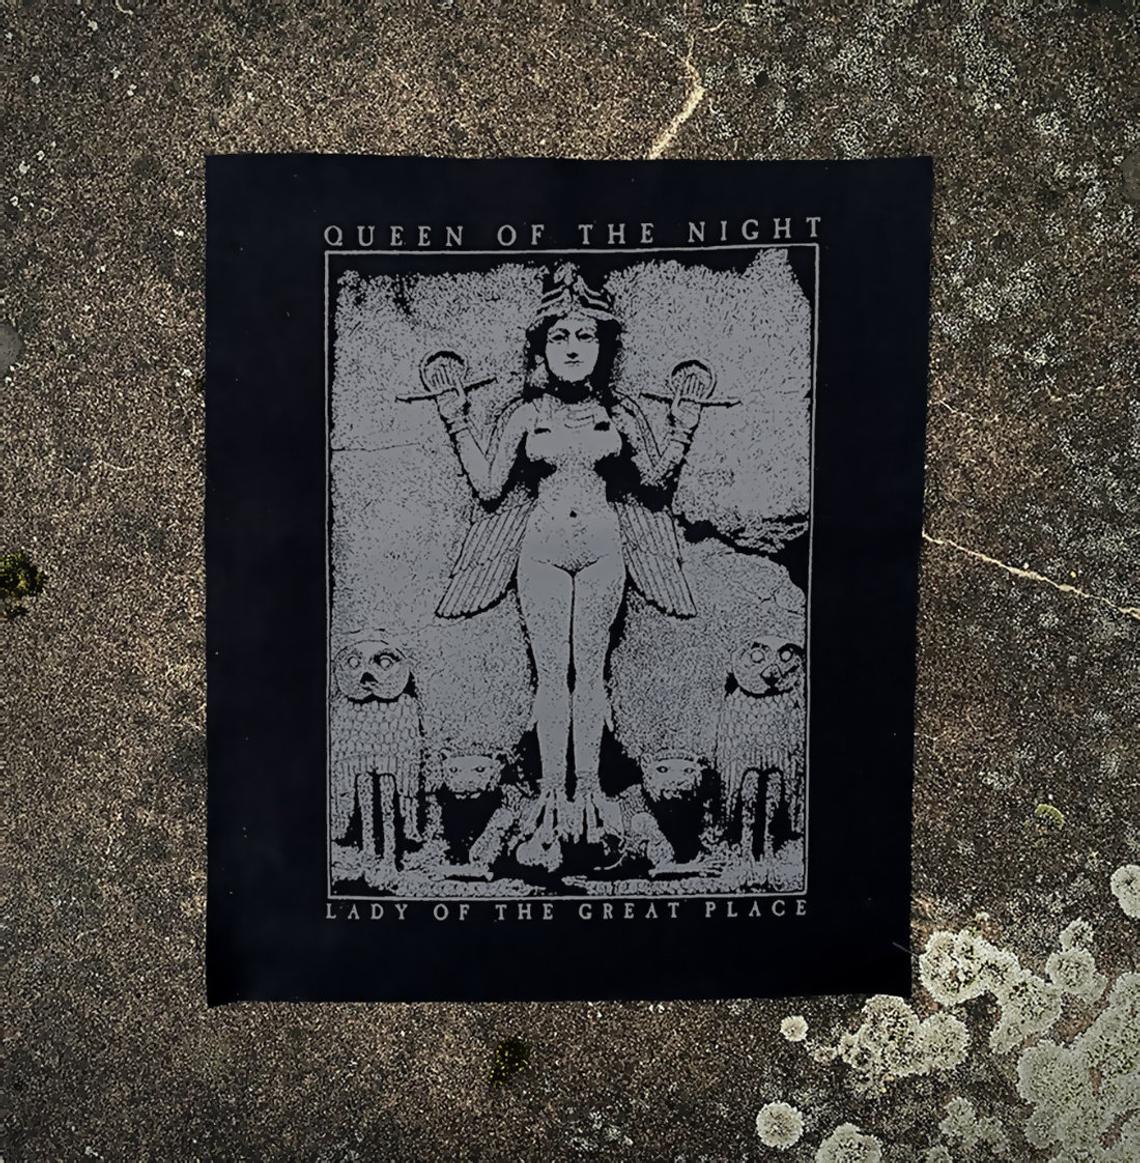 Inanna / Ishtar / Ereshkigal / Lilith, dark mother and goddess of the night - Backpatch by Torvenius